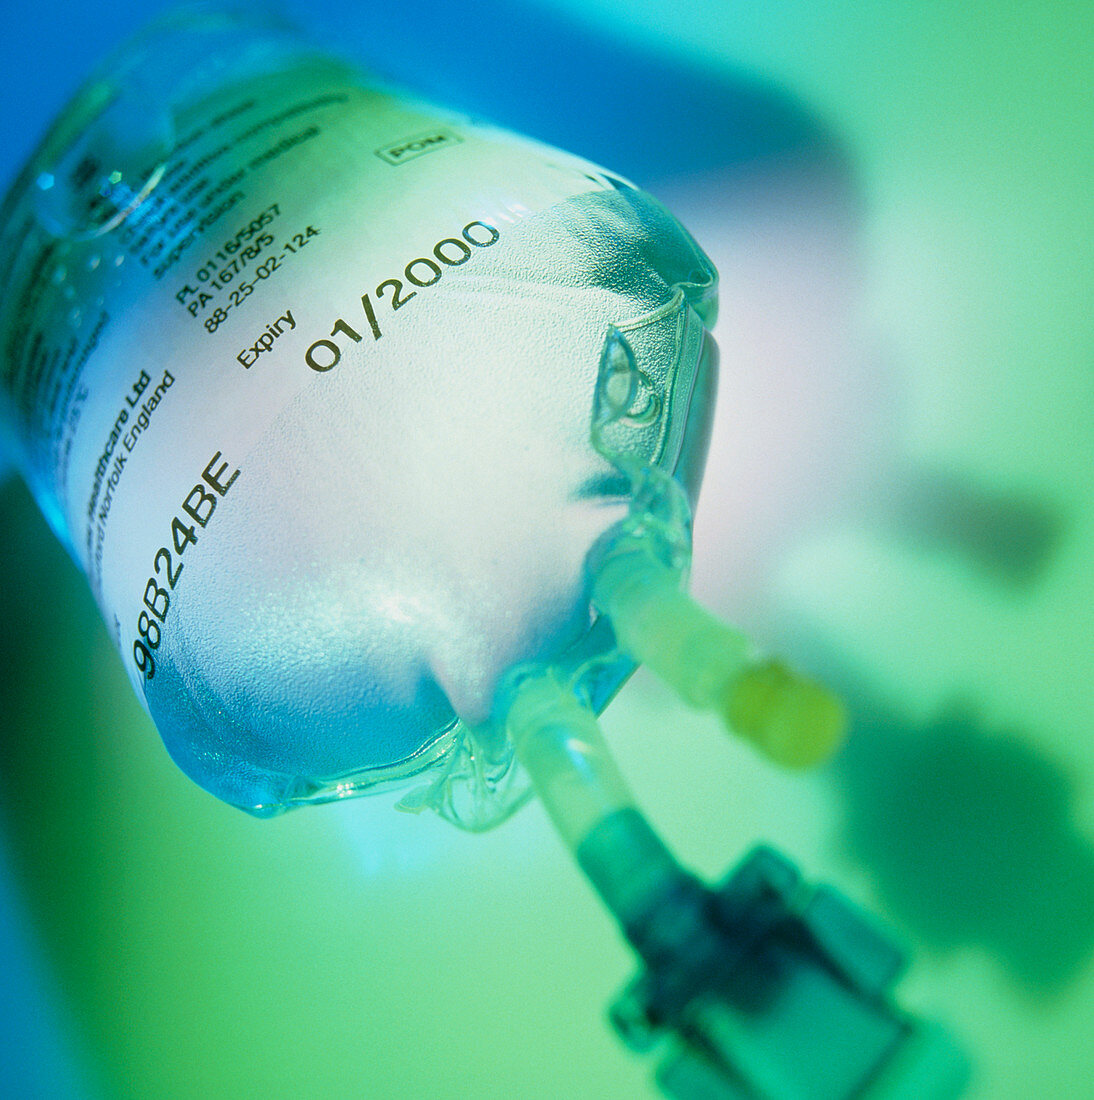 View of an intravenous drip bag